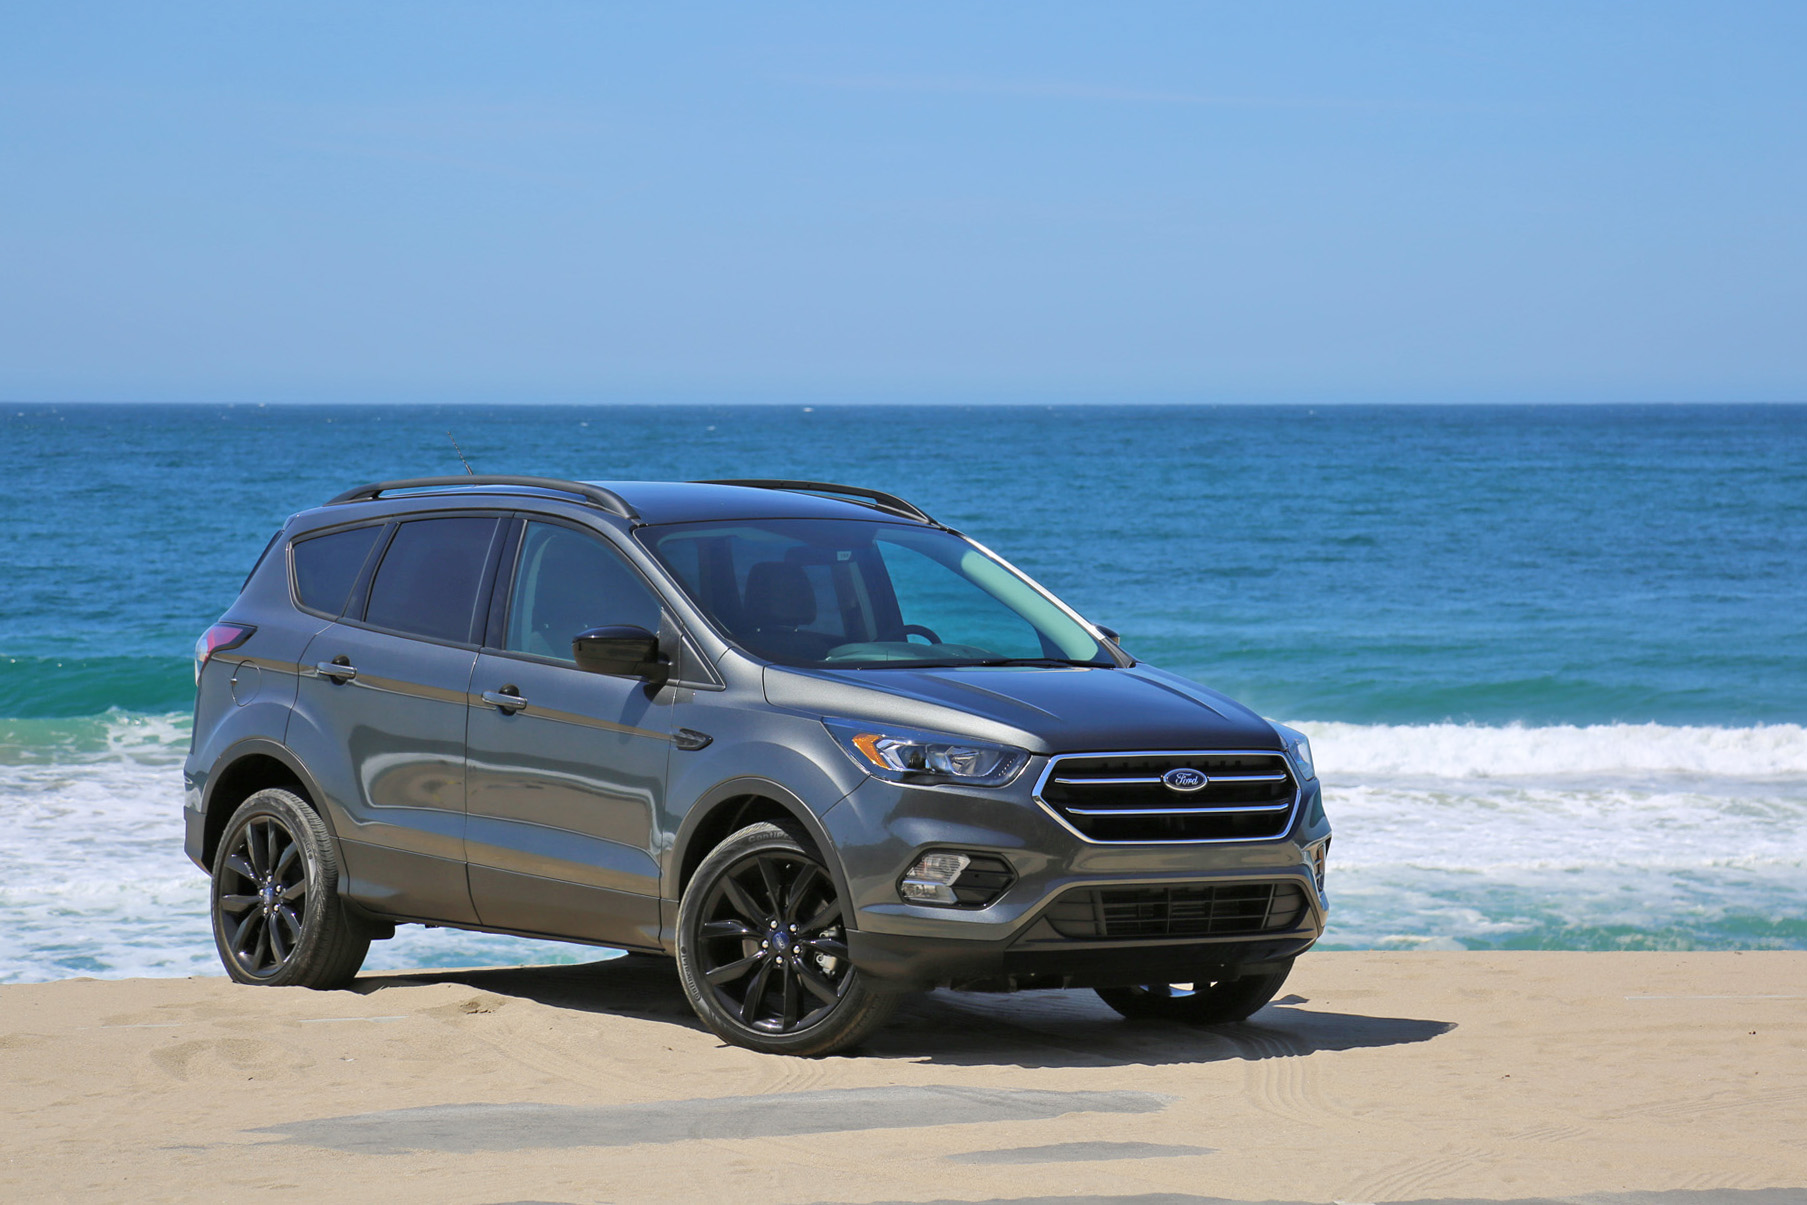 Redesigned 2017 Ford Escape Eludes Enthusiasts - Ford-Trucks.com1807 x 1205